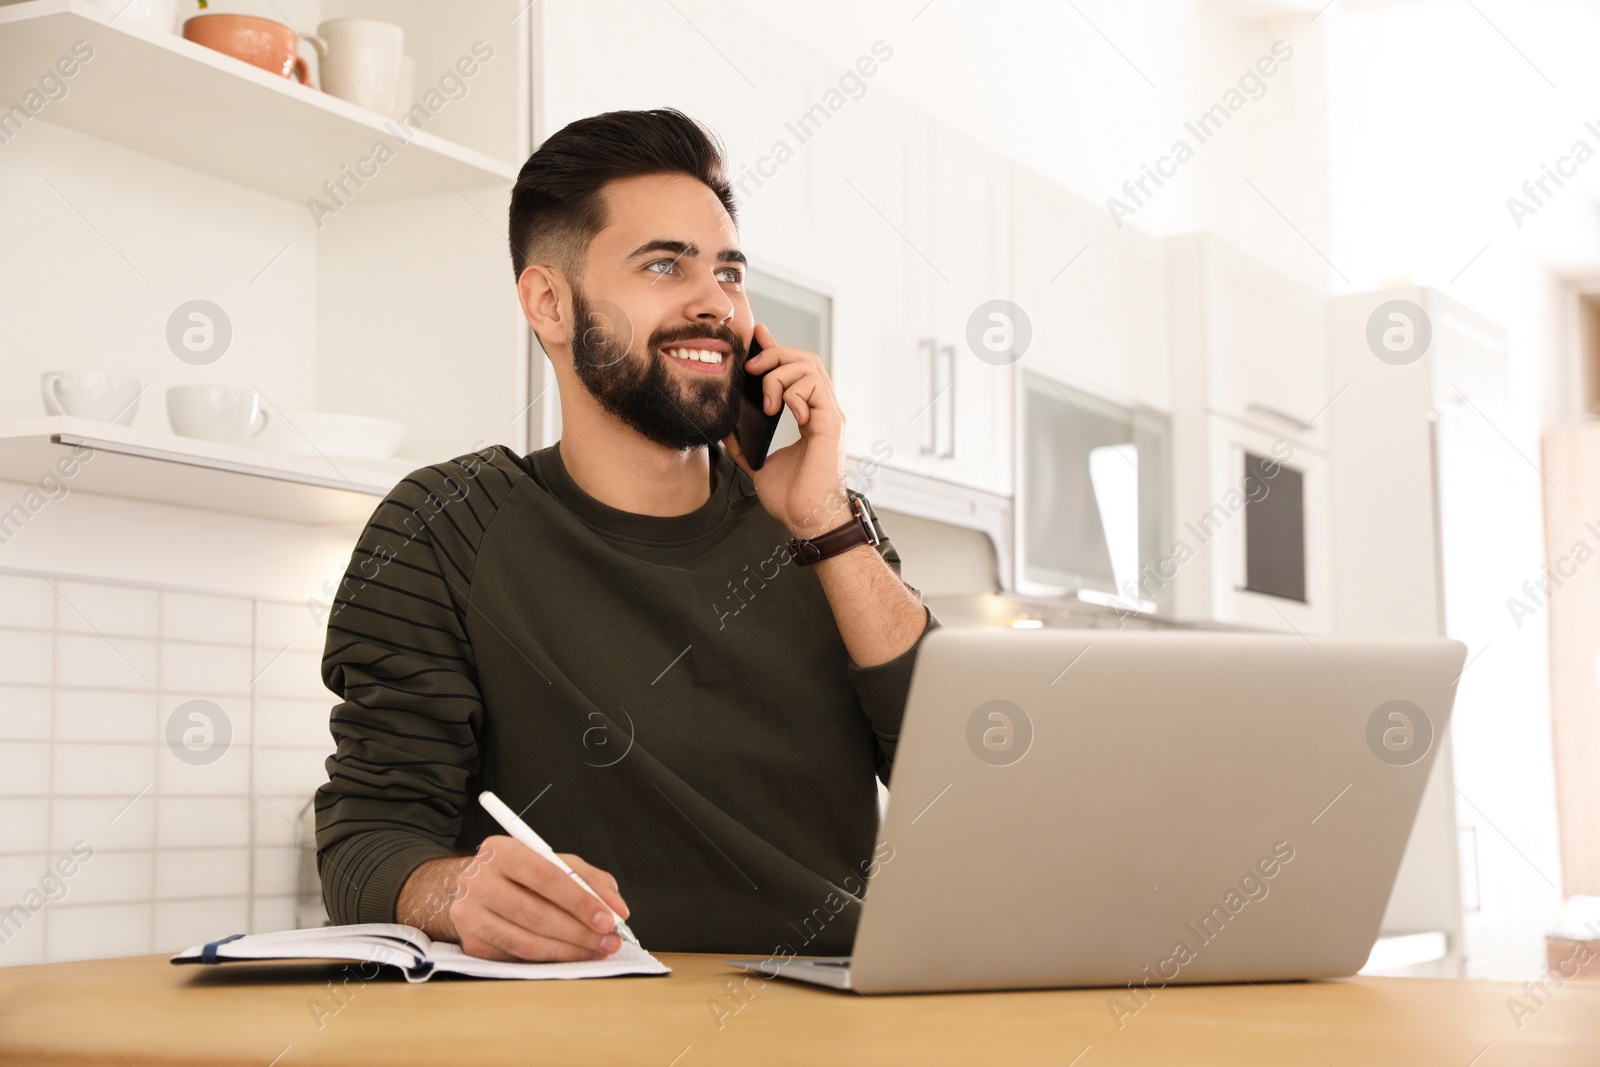 Photo of Handsome young man talking on phone while working at table in kitchen